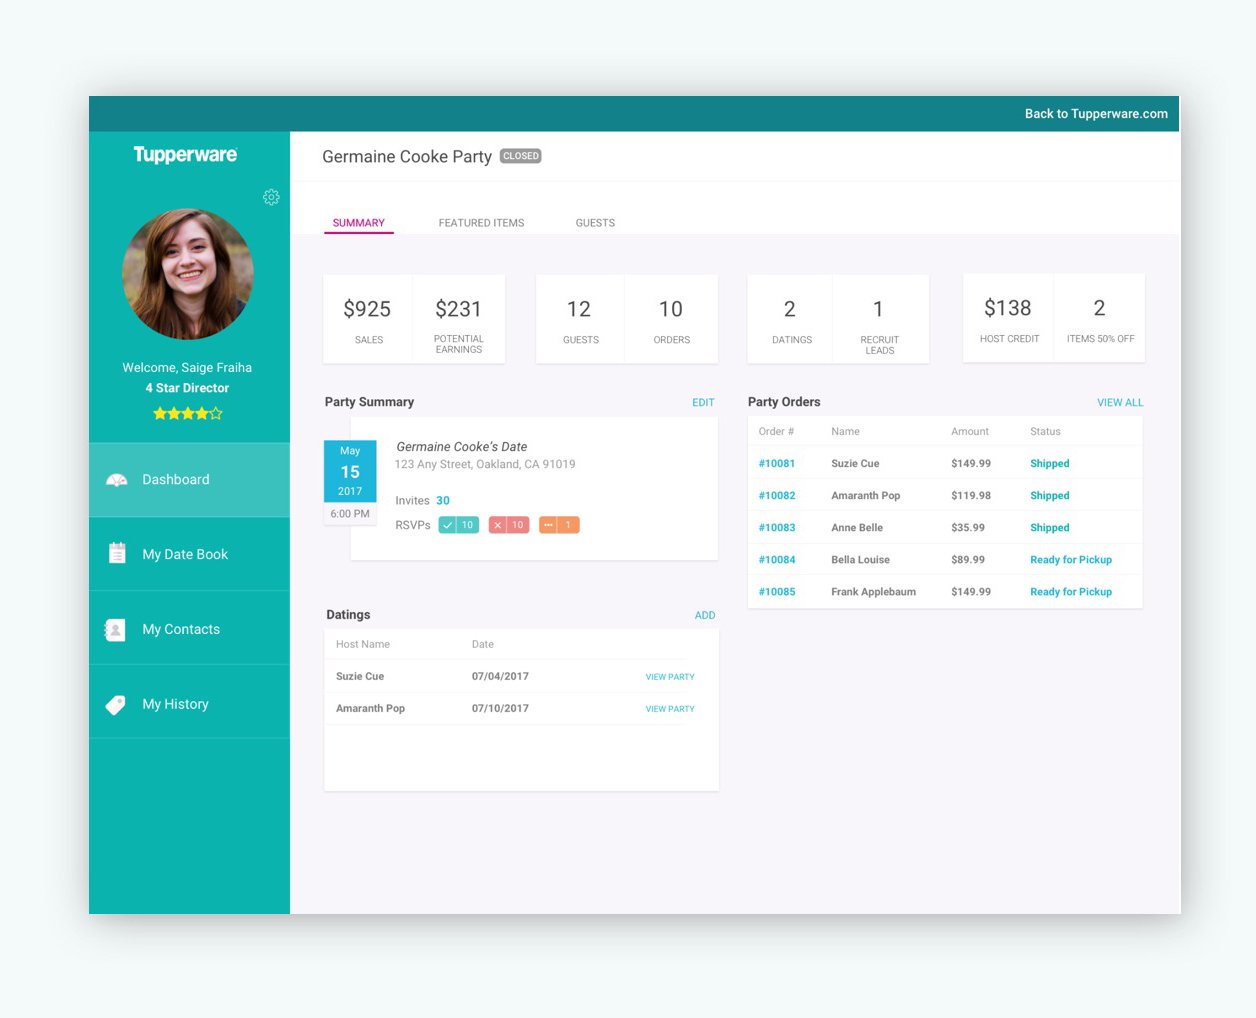 Custom feature enables consultants to easily navigate to parties